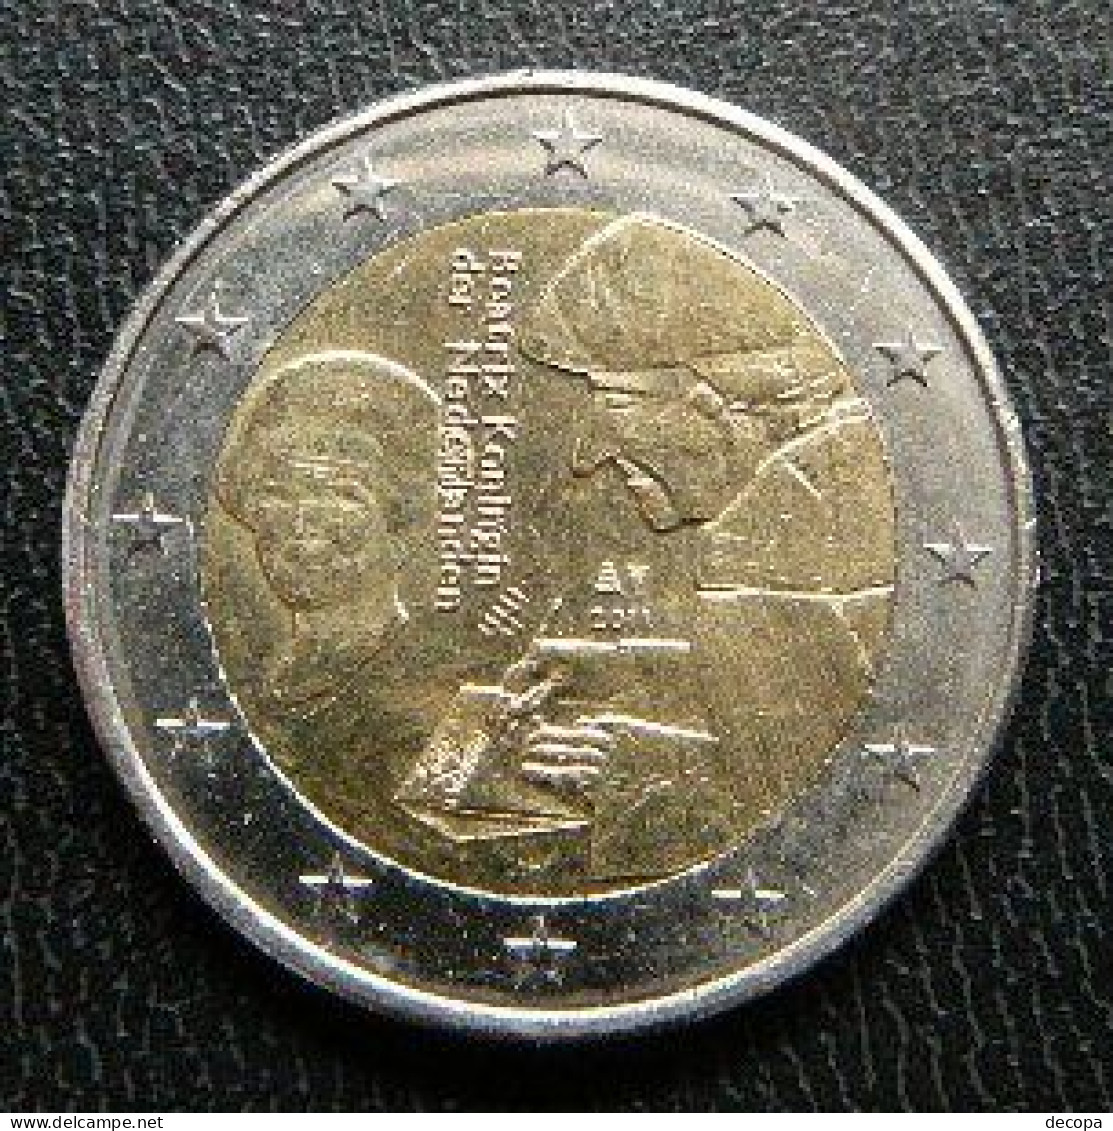 Netherlands - Pays-Bas - Nederland   2 EURO 2011  Speciale Uitgave - Commemorative - Pays-Bas